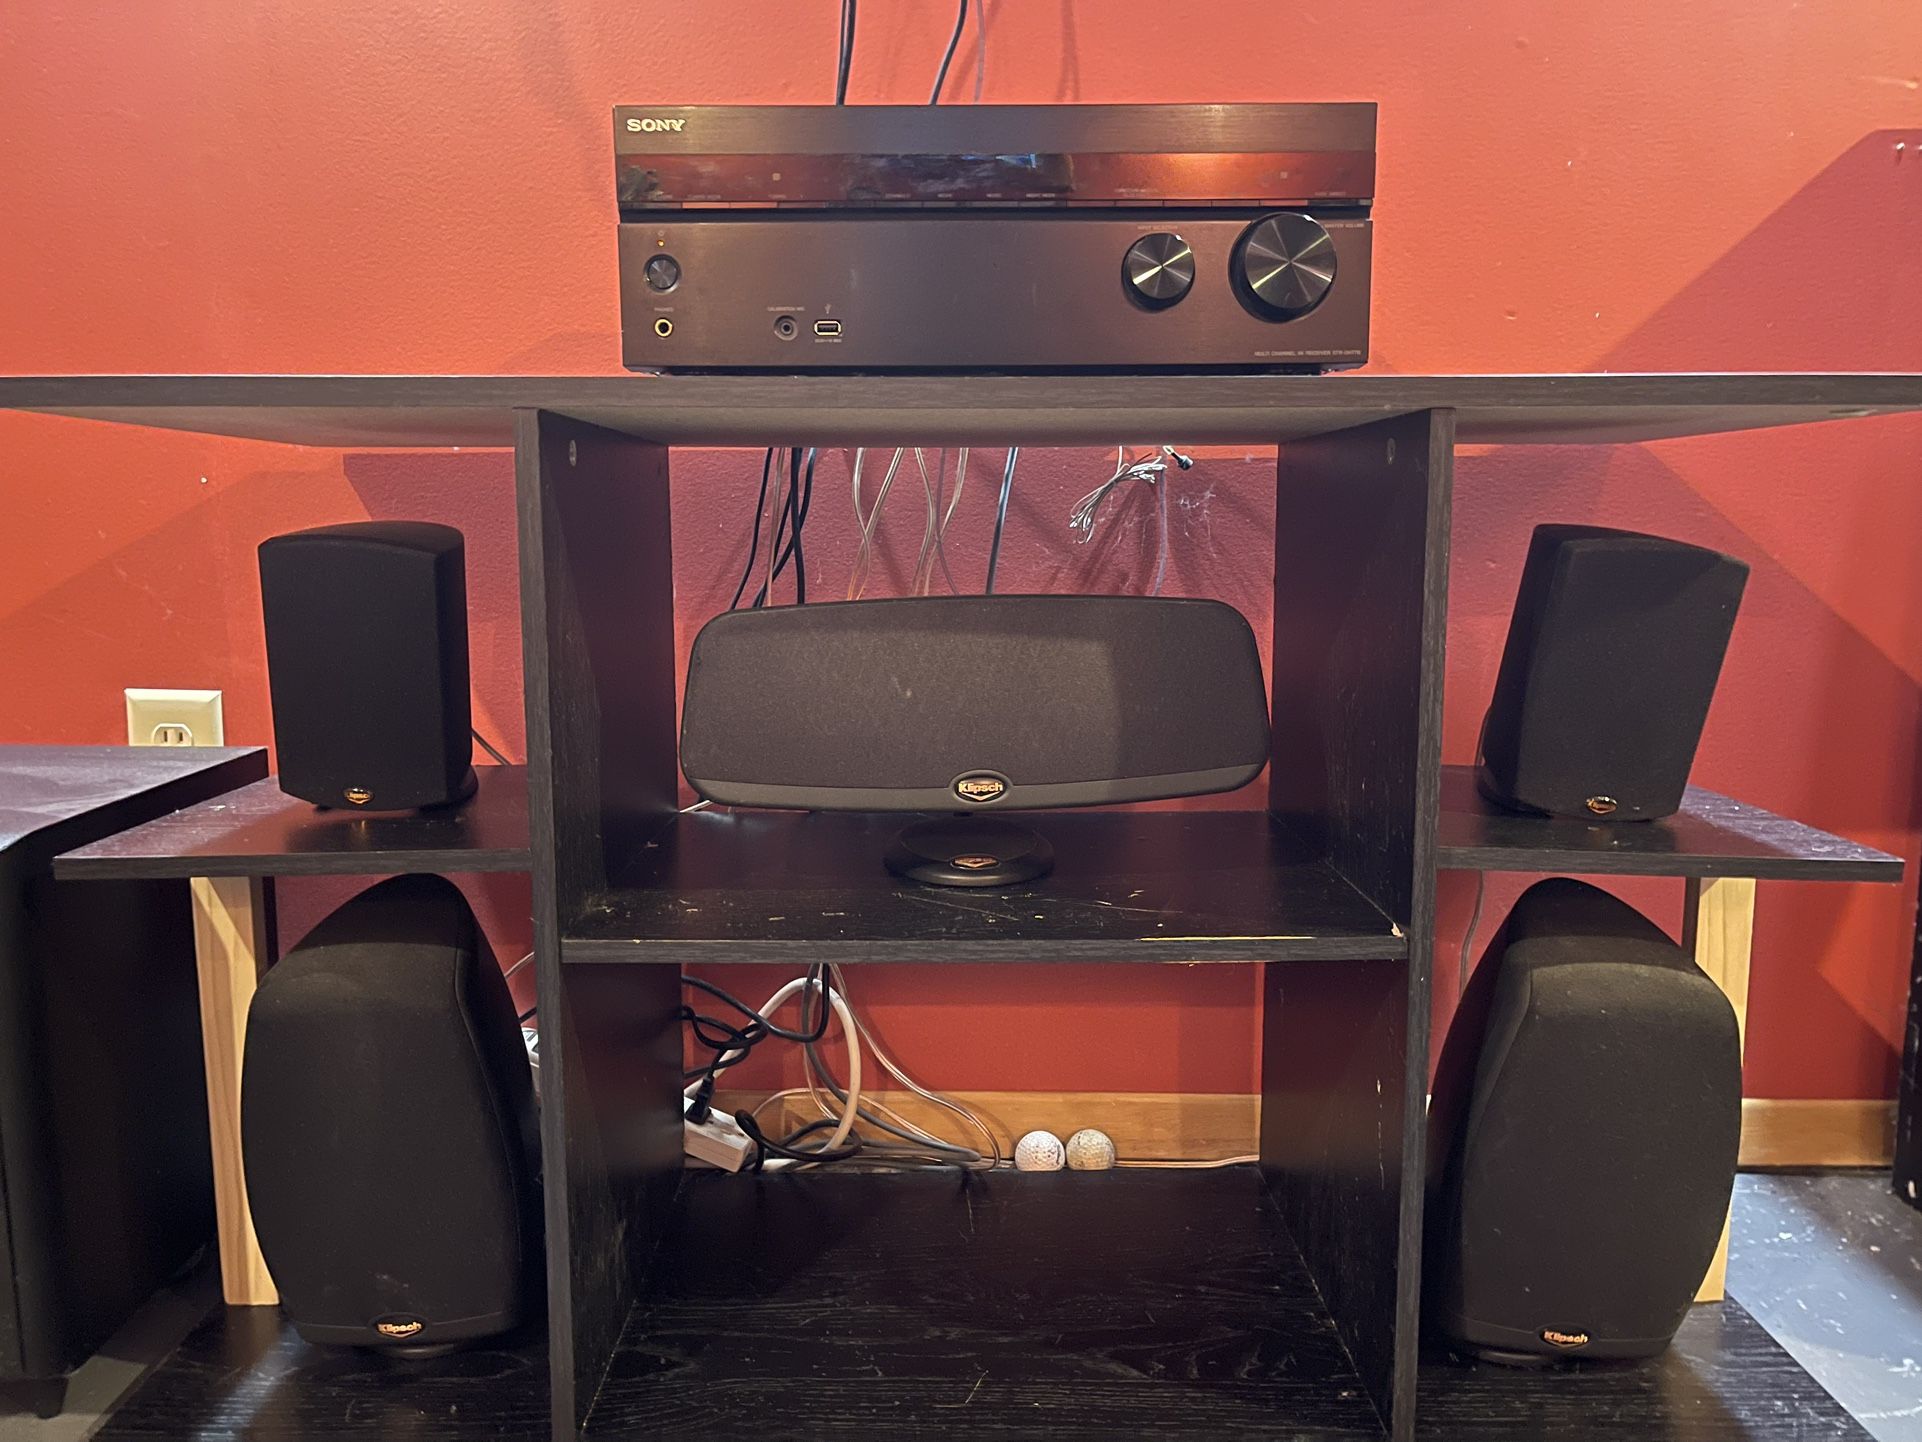 Klipsch Speakers, Sony Receiver, and 12” Infinity Sub